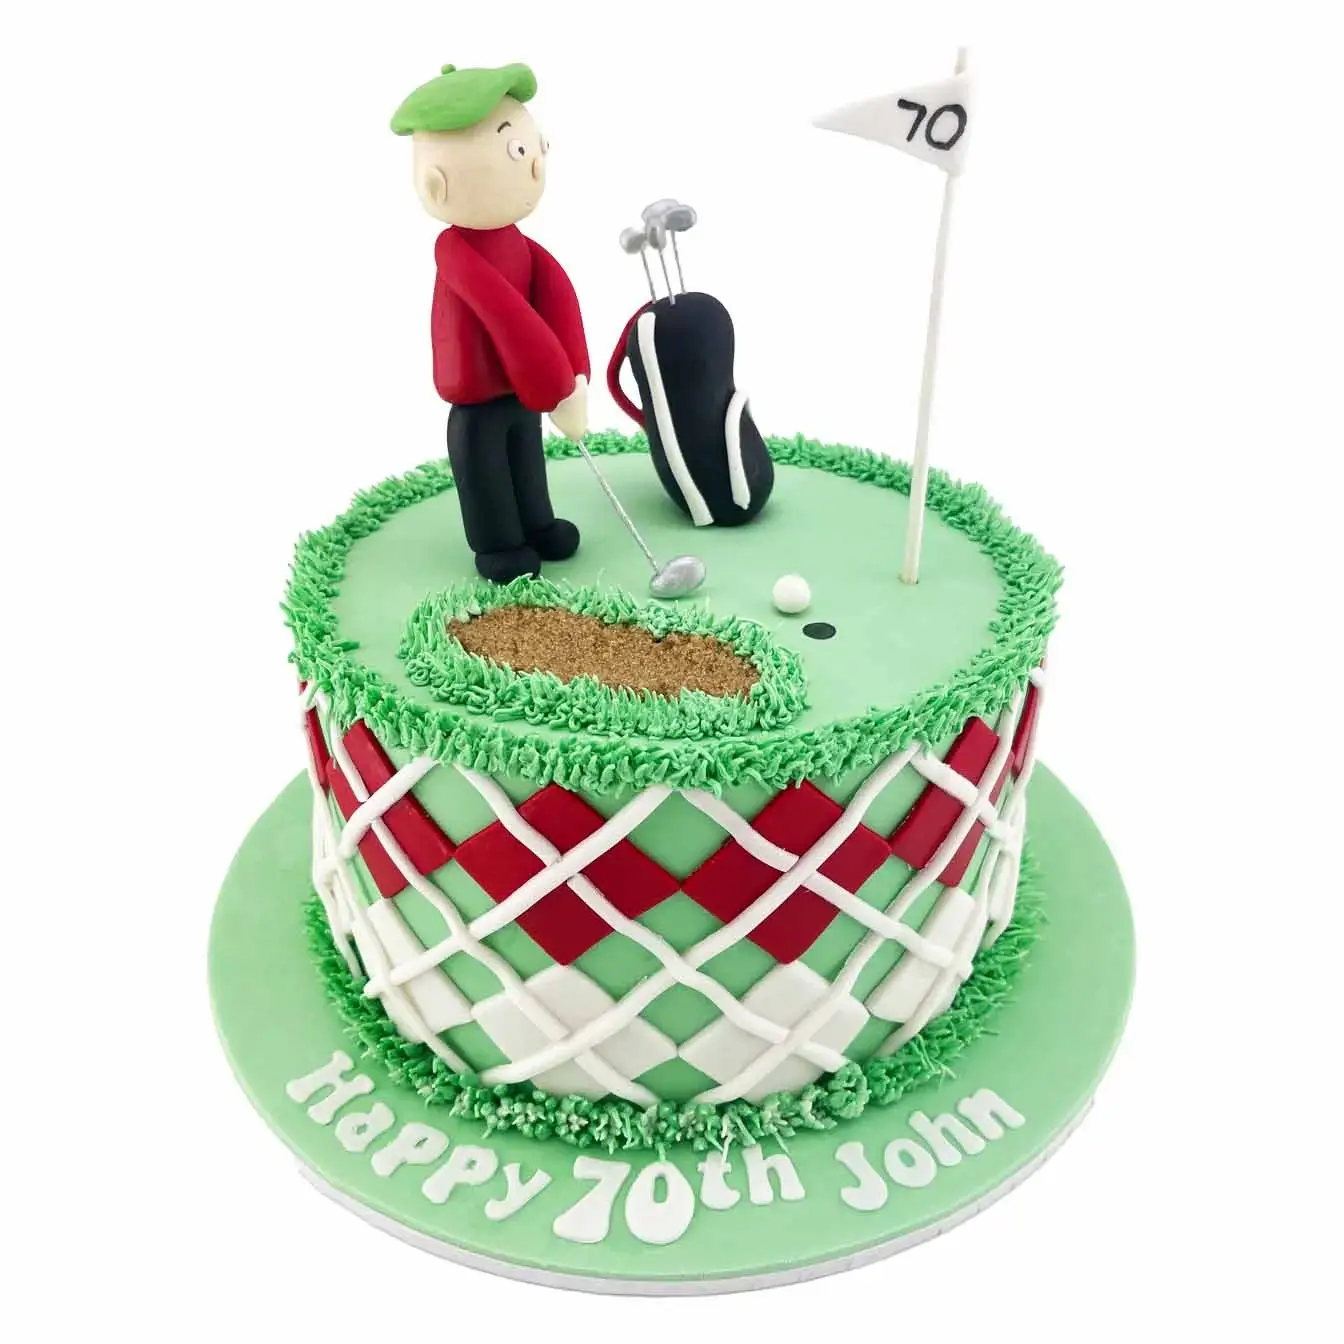 Golf cake with green icing and fondant golf bag, clubs, and balls. Perfect for any golf lover's celebration!